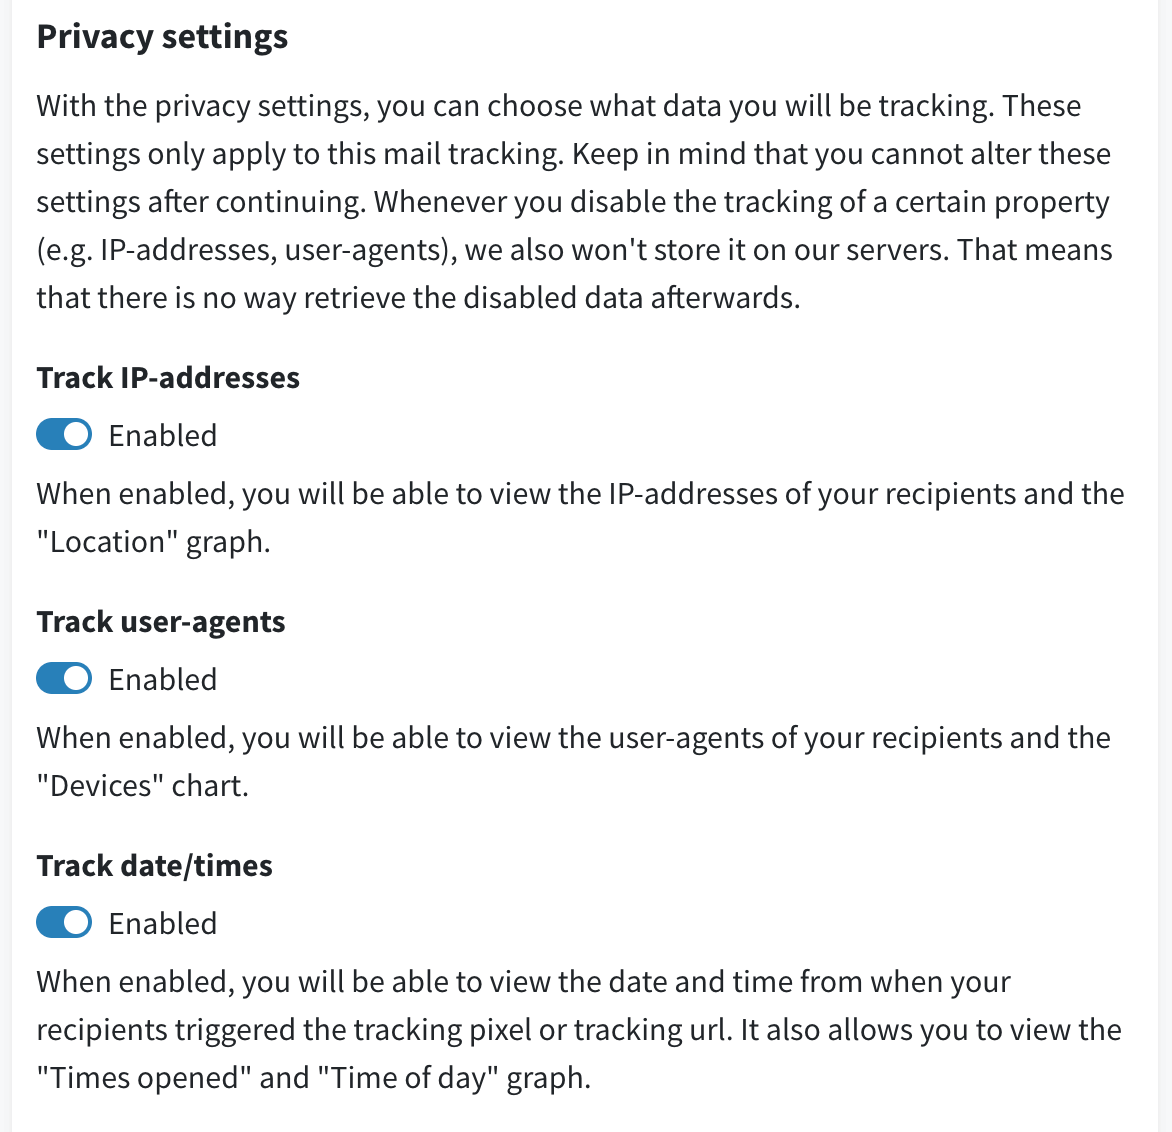 Privacy settings options